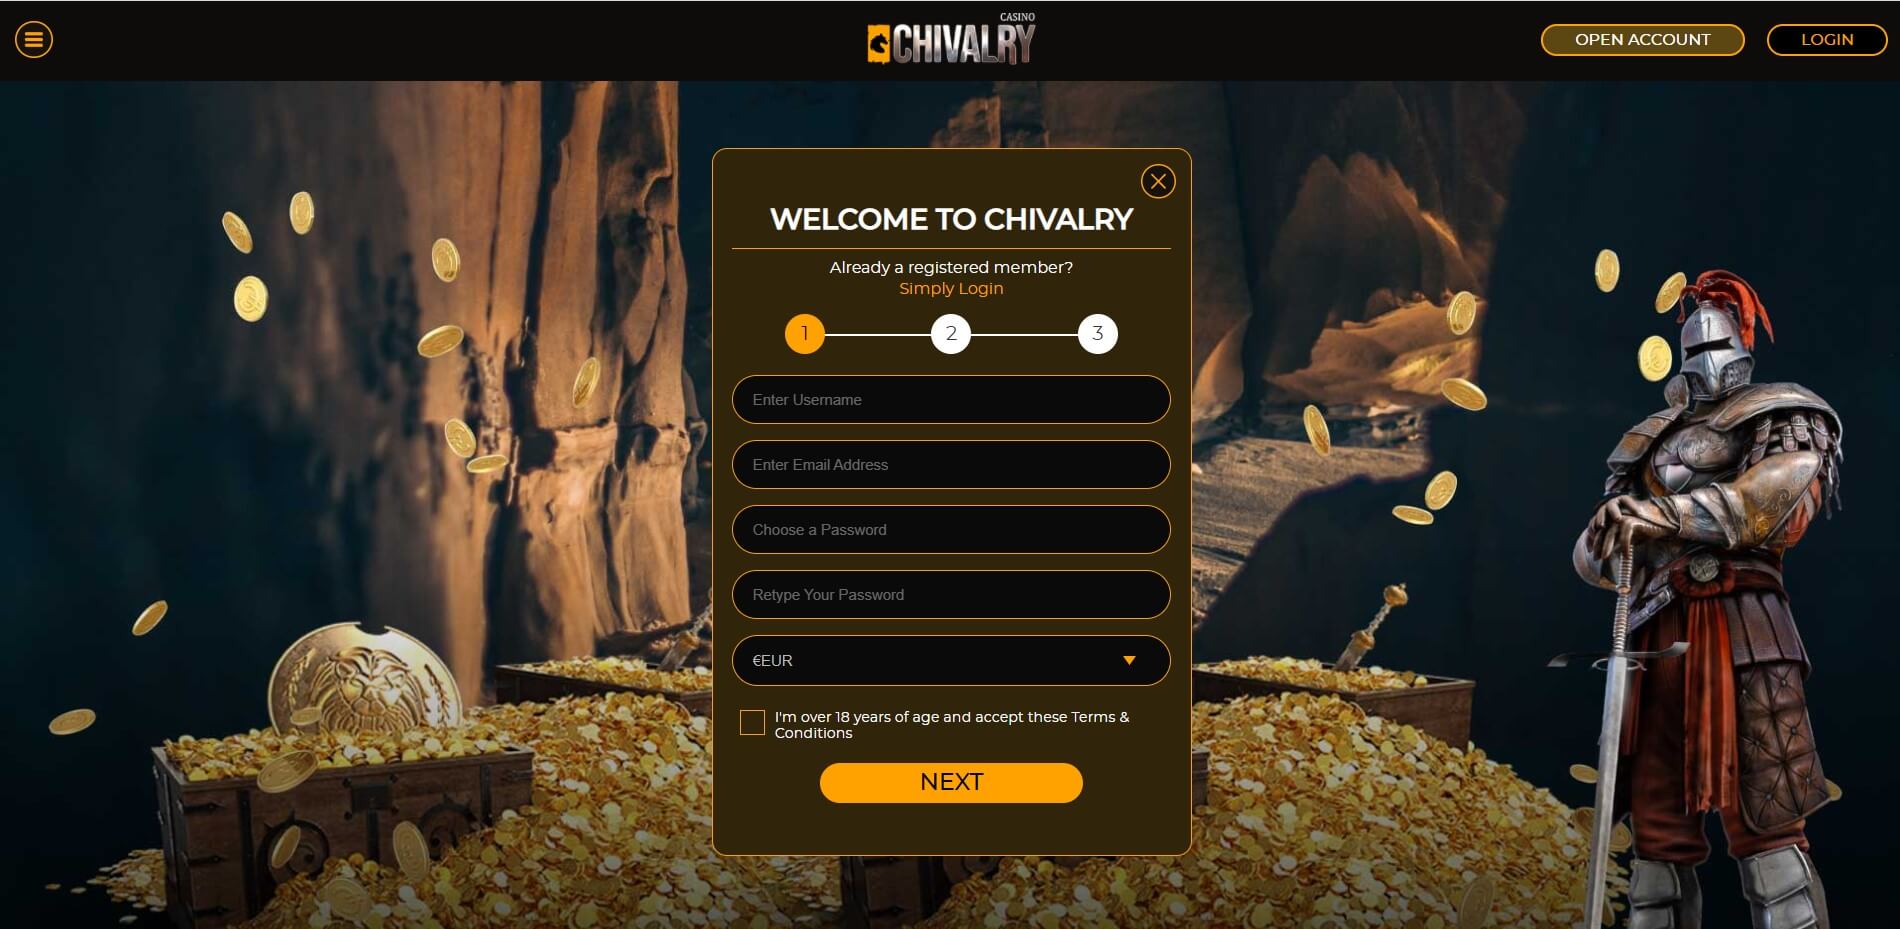 SignUp at Chivalry Casino